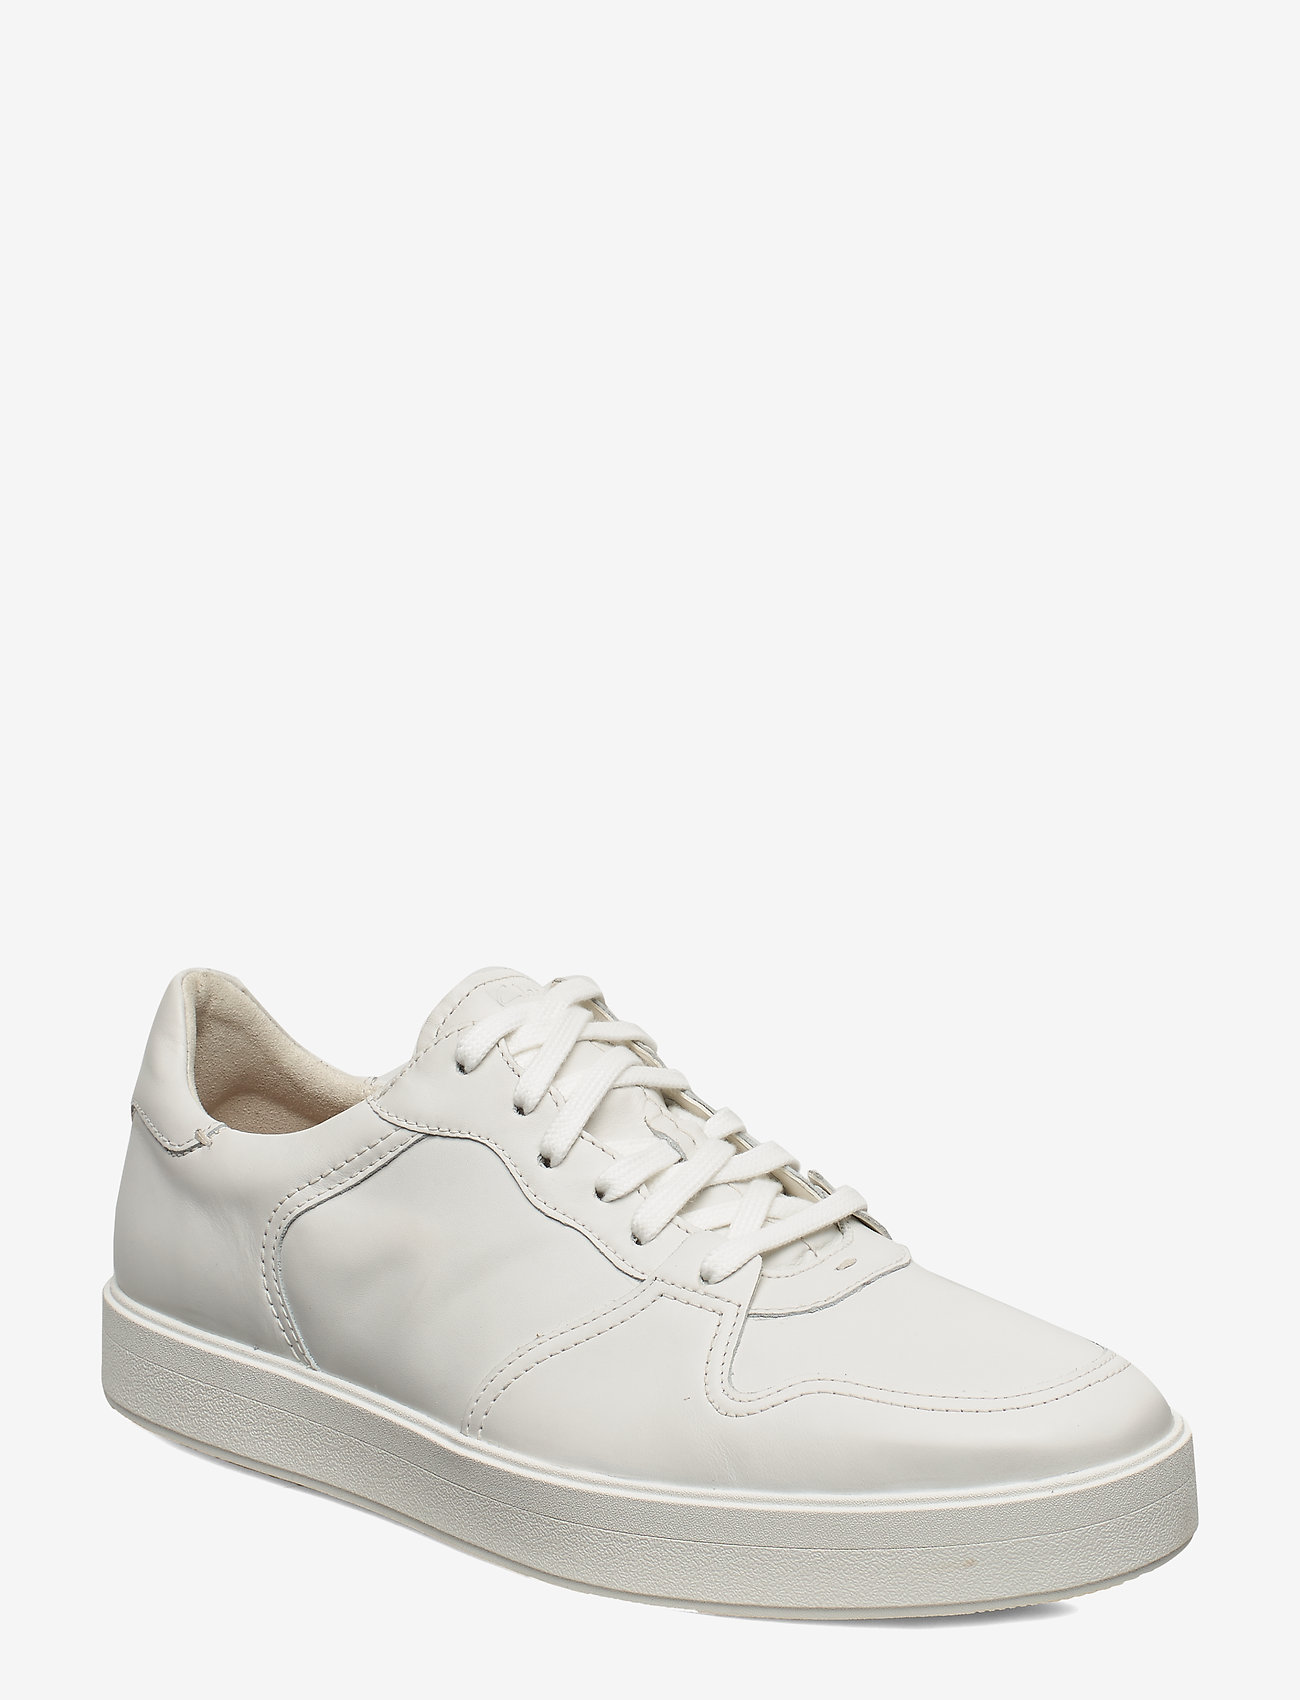 clarks leather tennis shoes